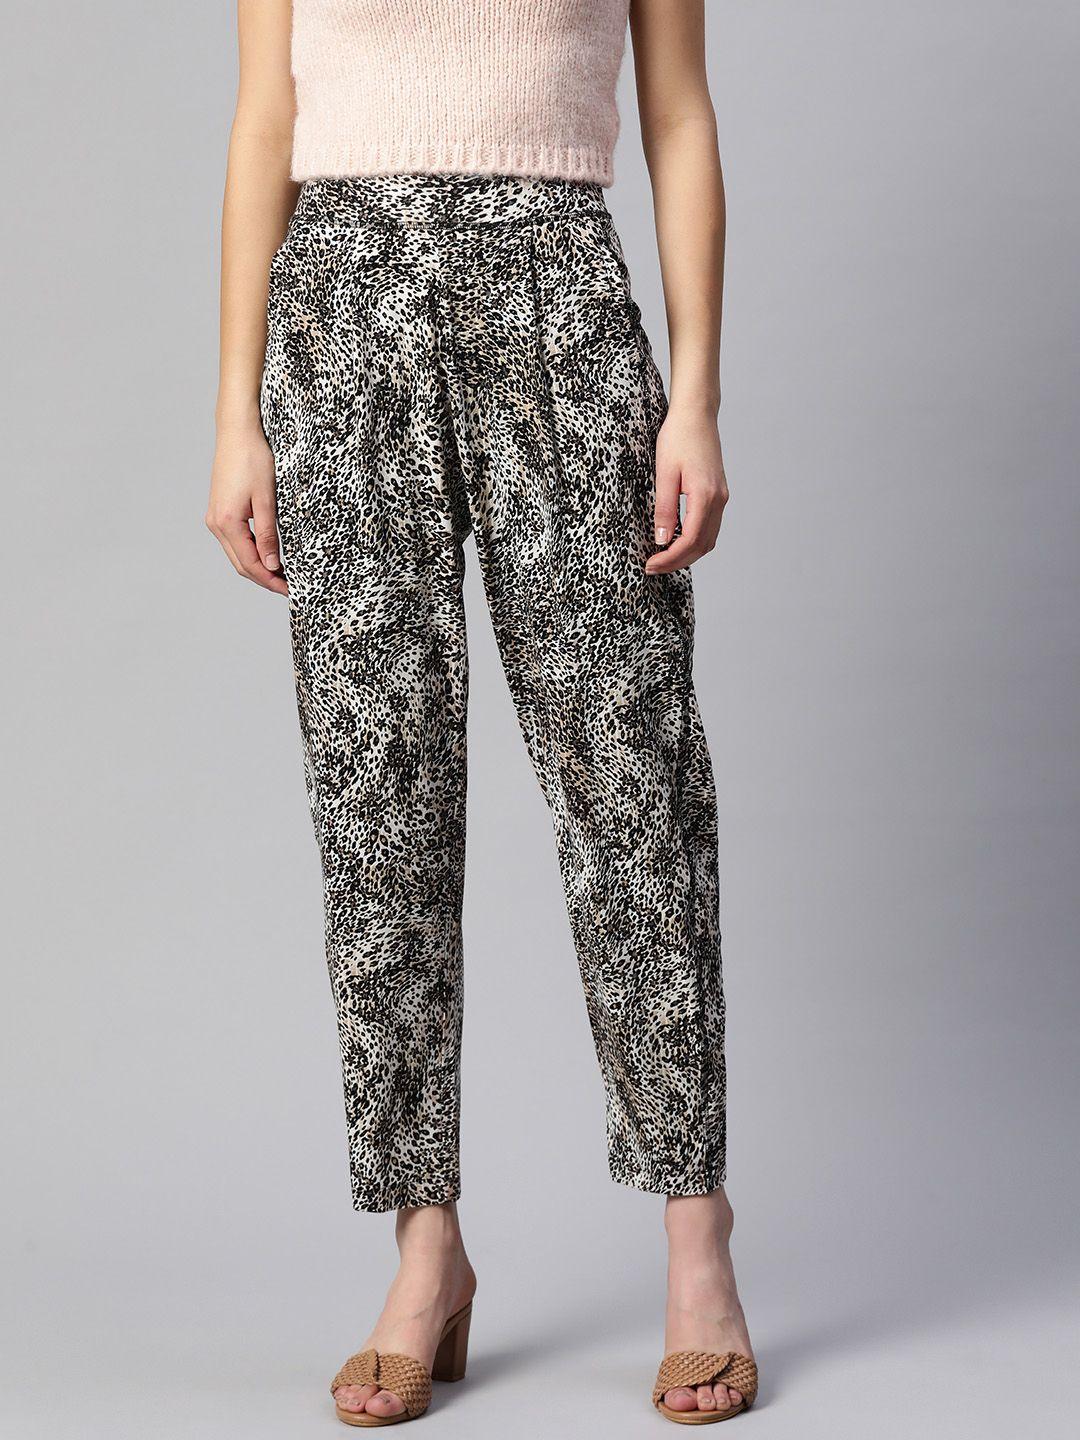 marks-&-spencer-women-animal-printed-high-rise-jersey-pleated-trousers